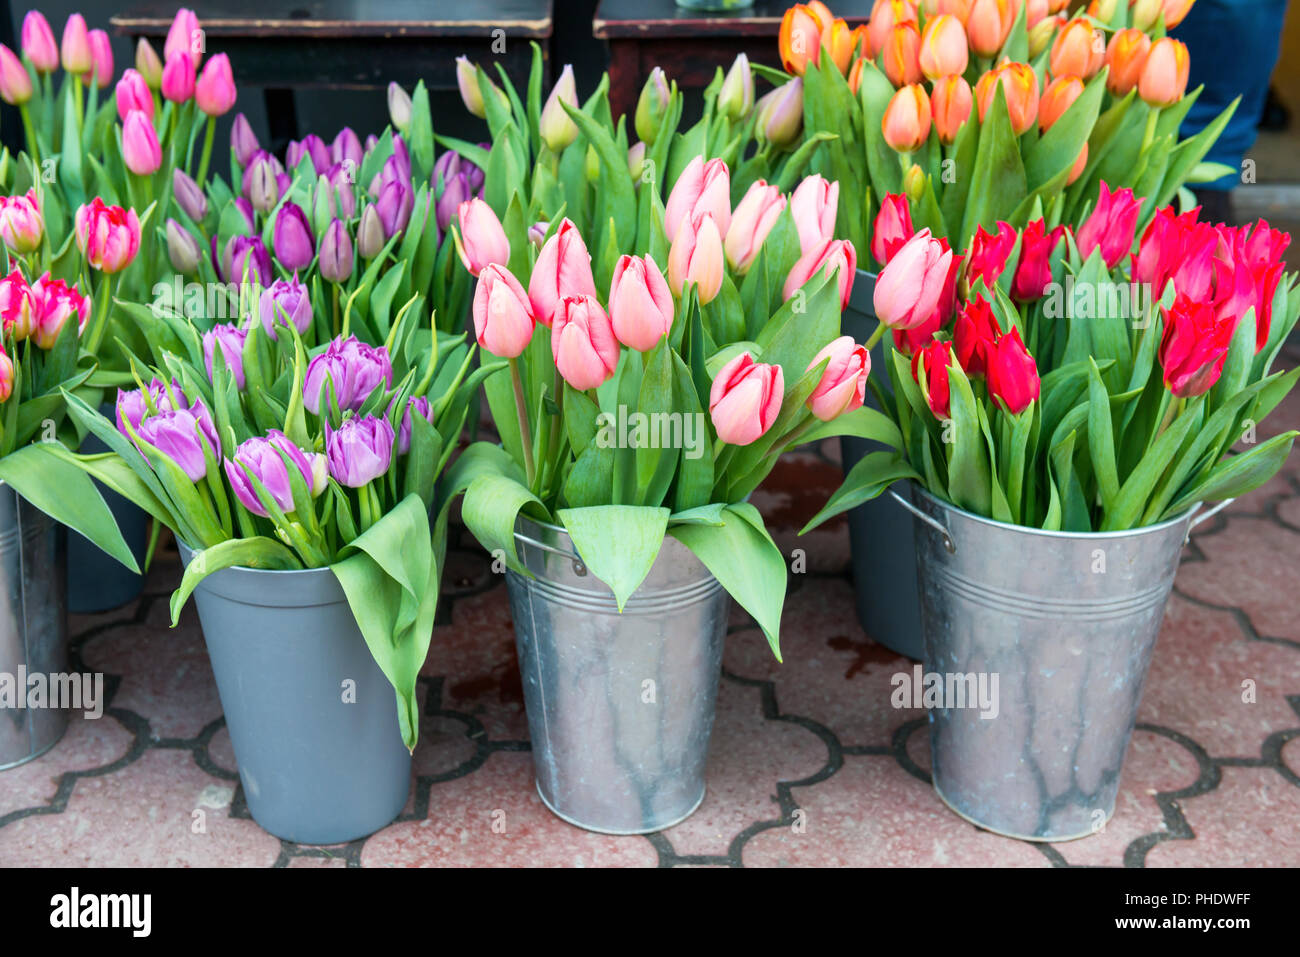 Tulips in the buckets Stock Photo - Alamy